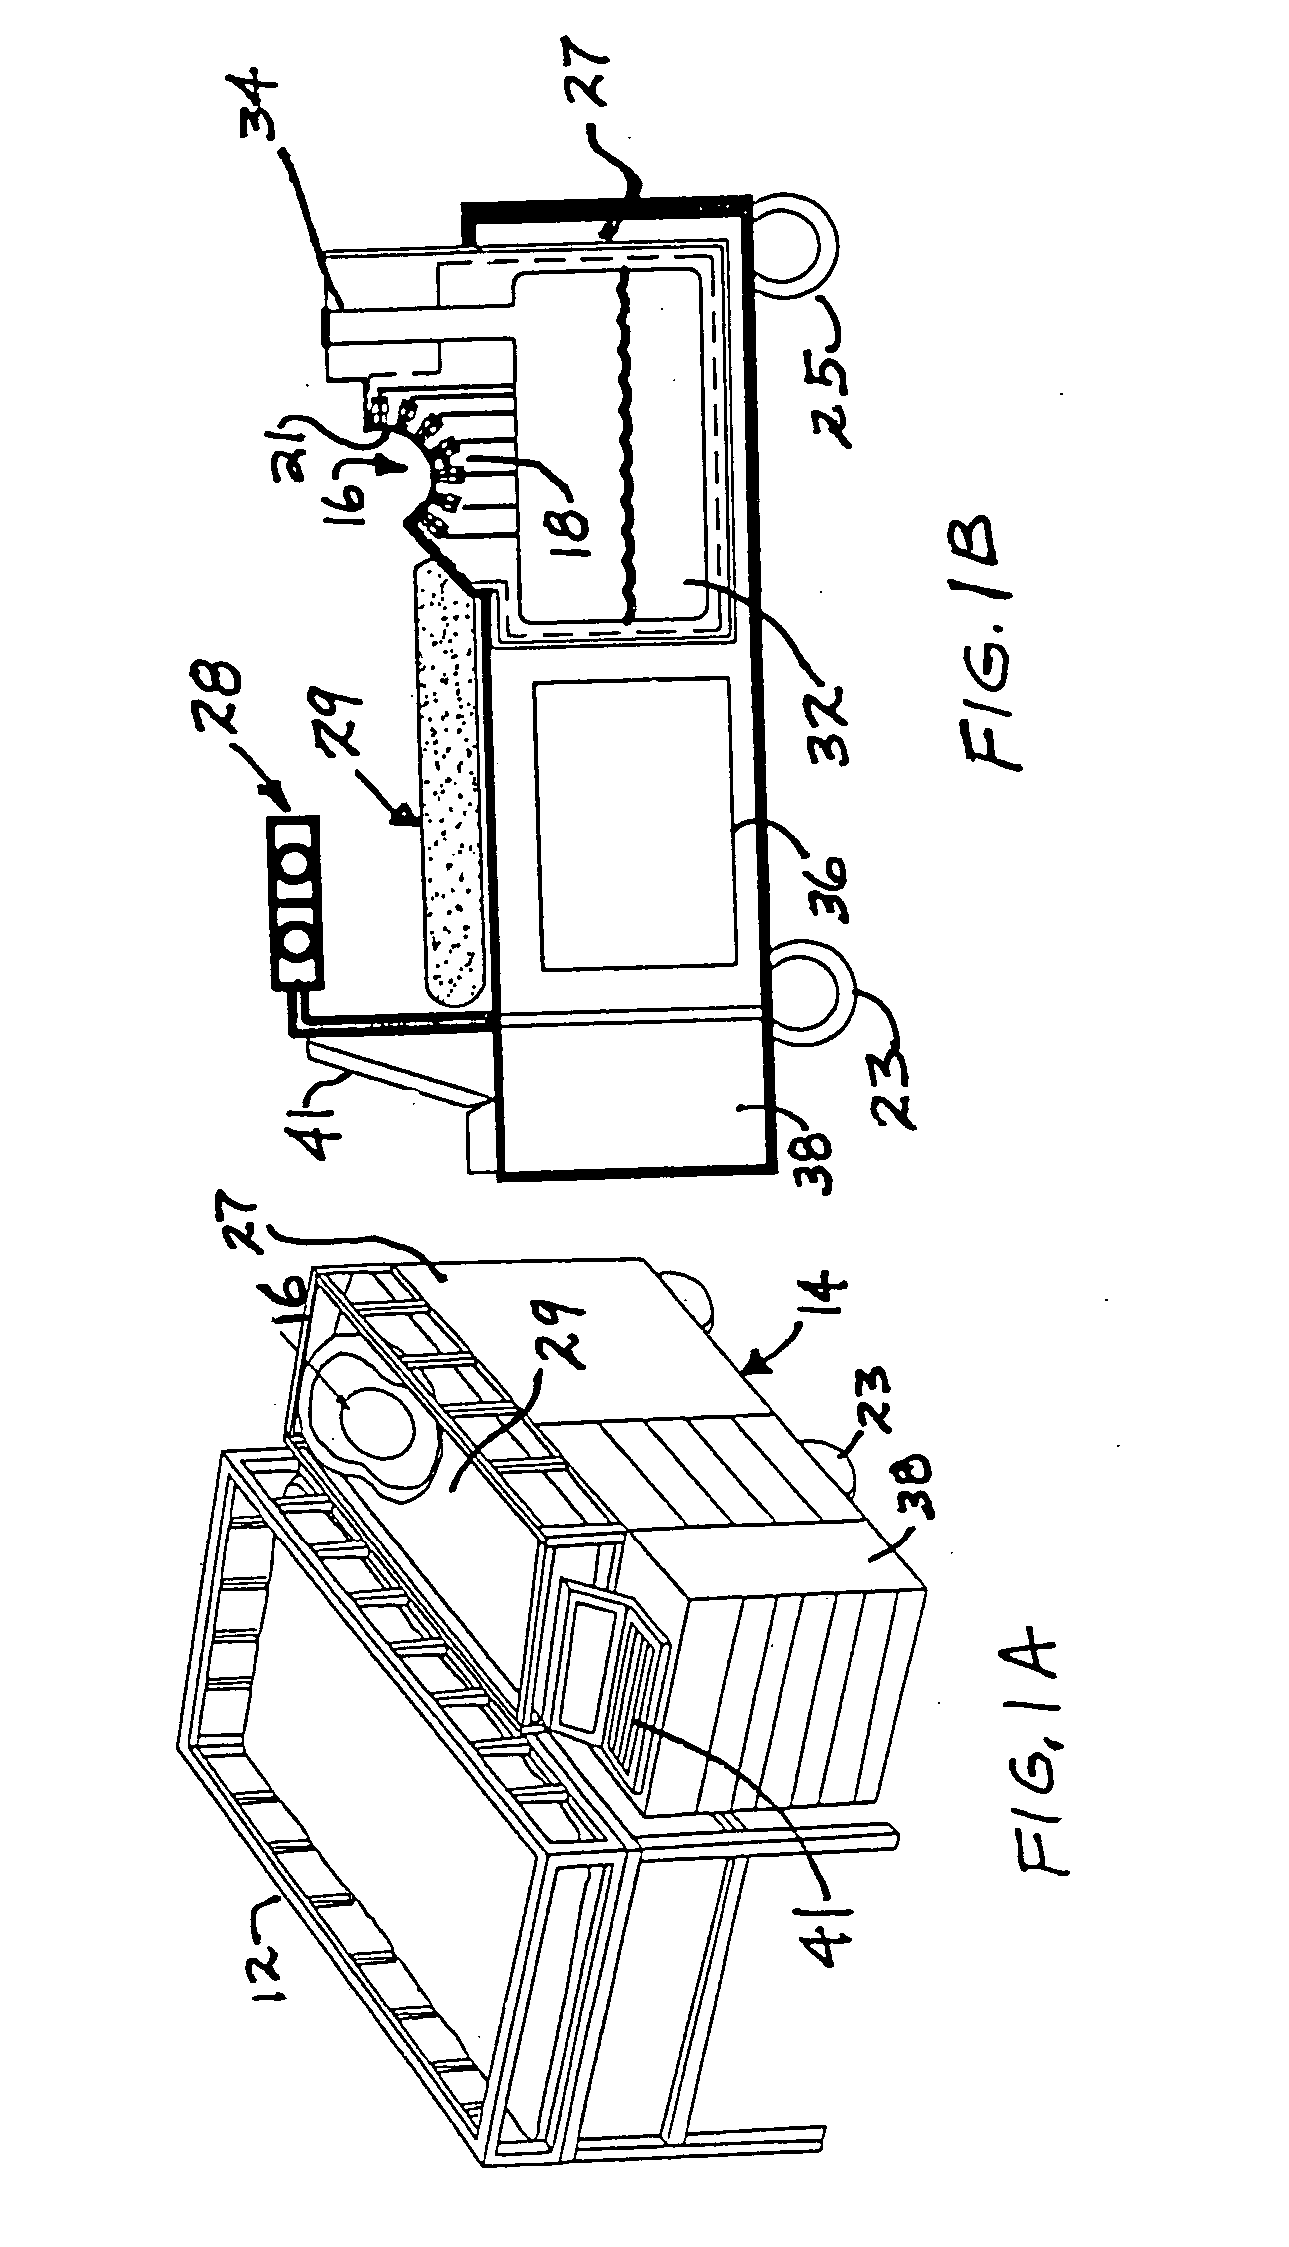 High-resolution magnetoencephalography system and method